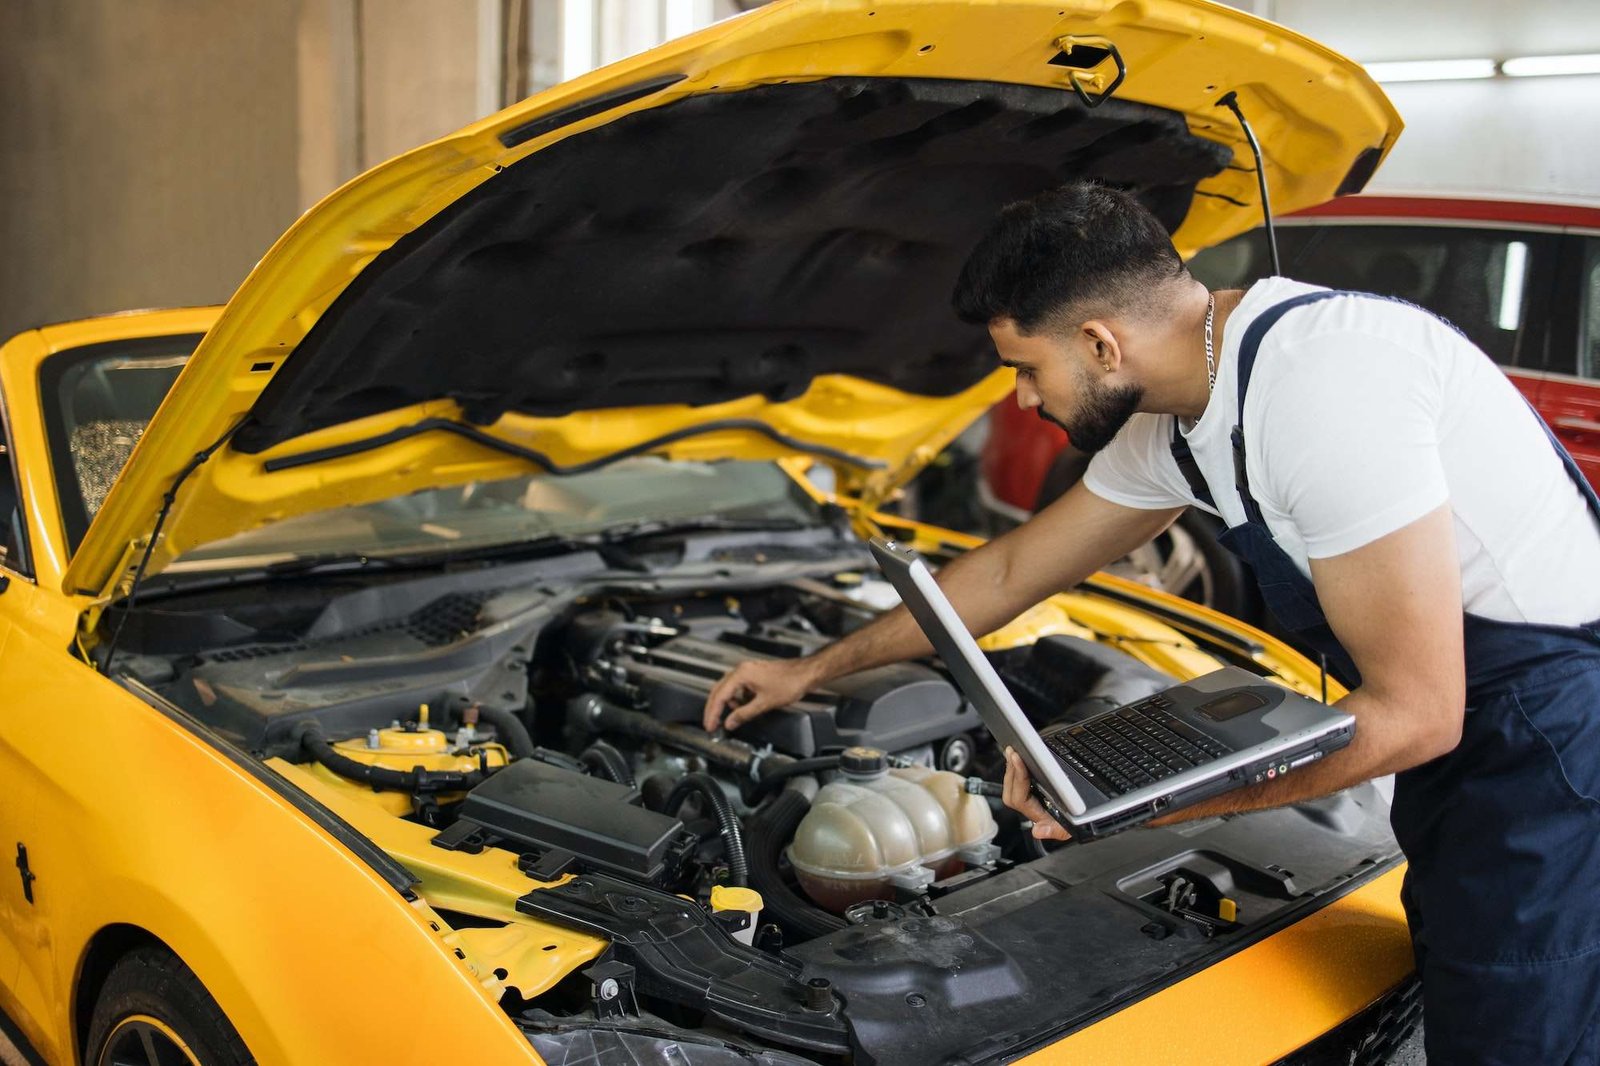 Engineer young man looking at inspection vehicle details under car hood